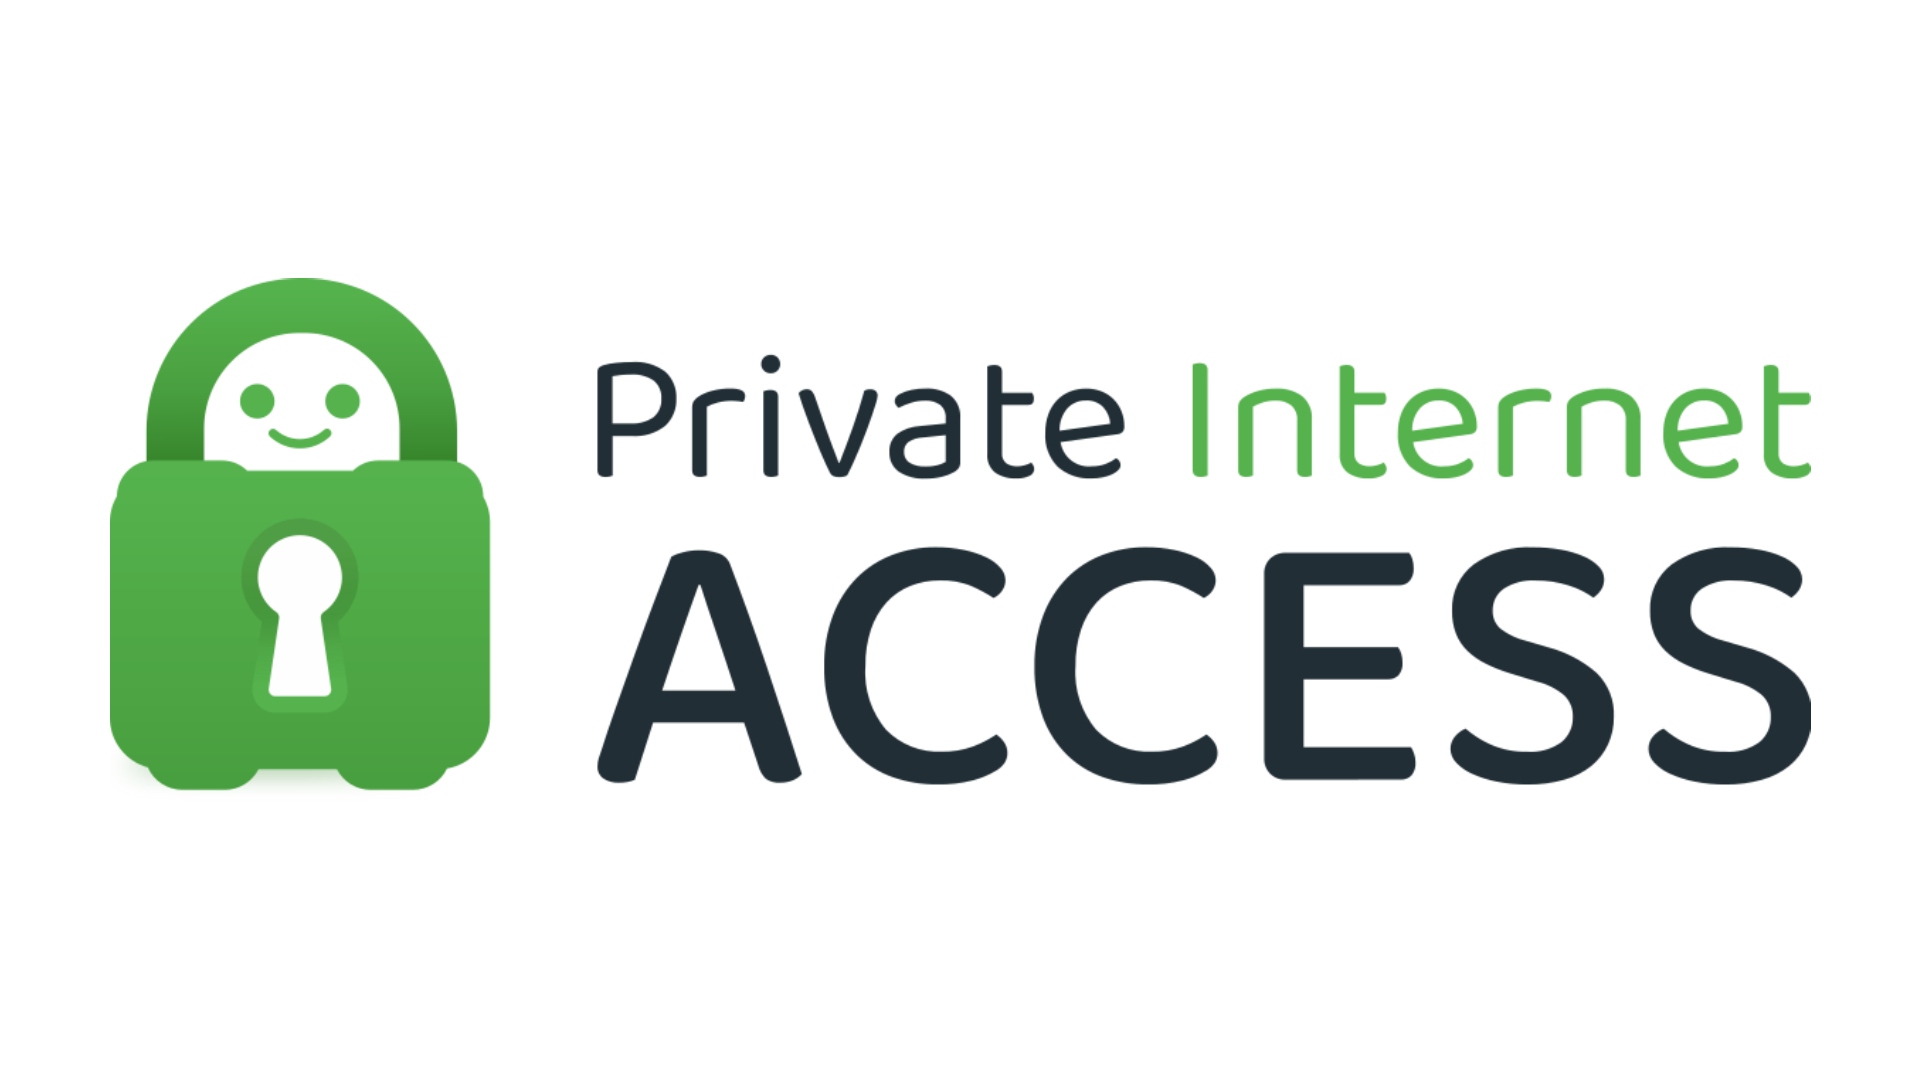 VPN servers from Private Internet Access. Image shows the company logo.